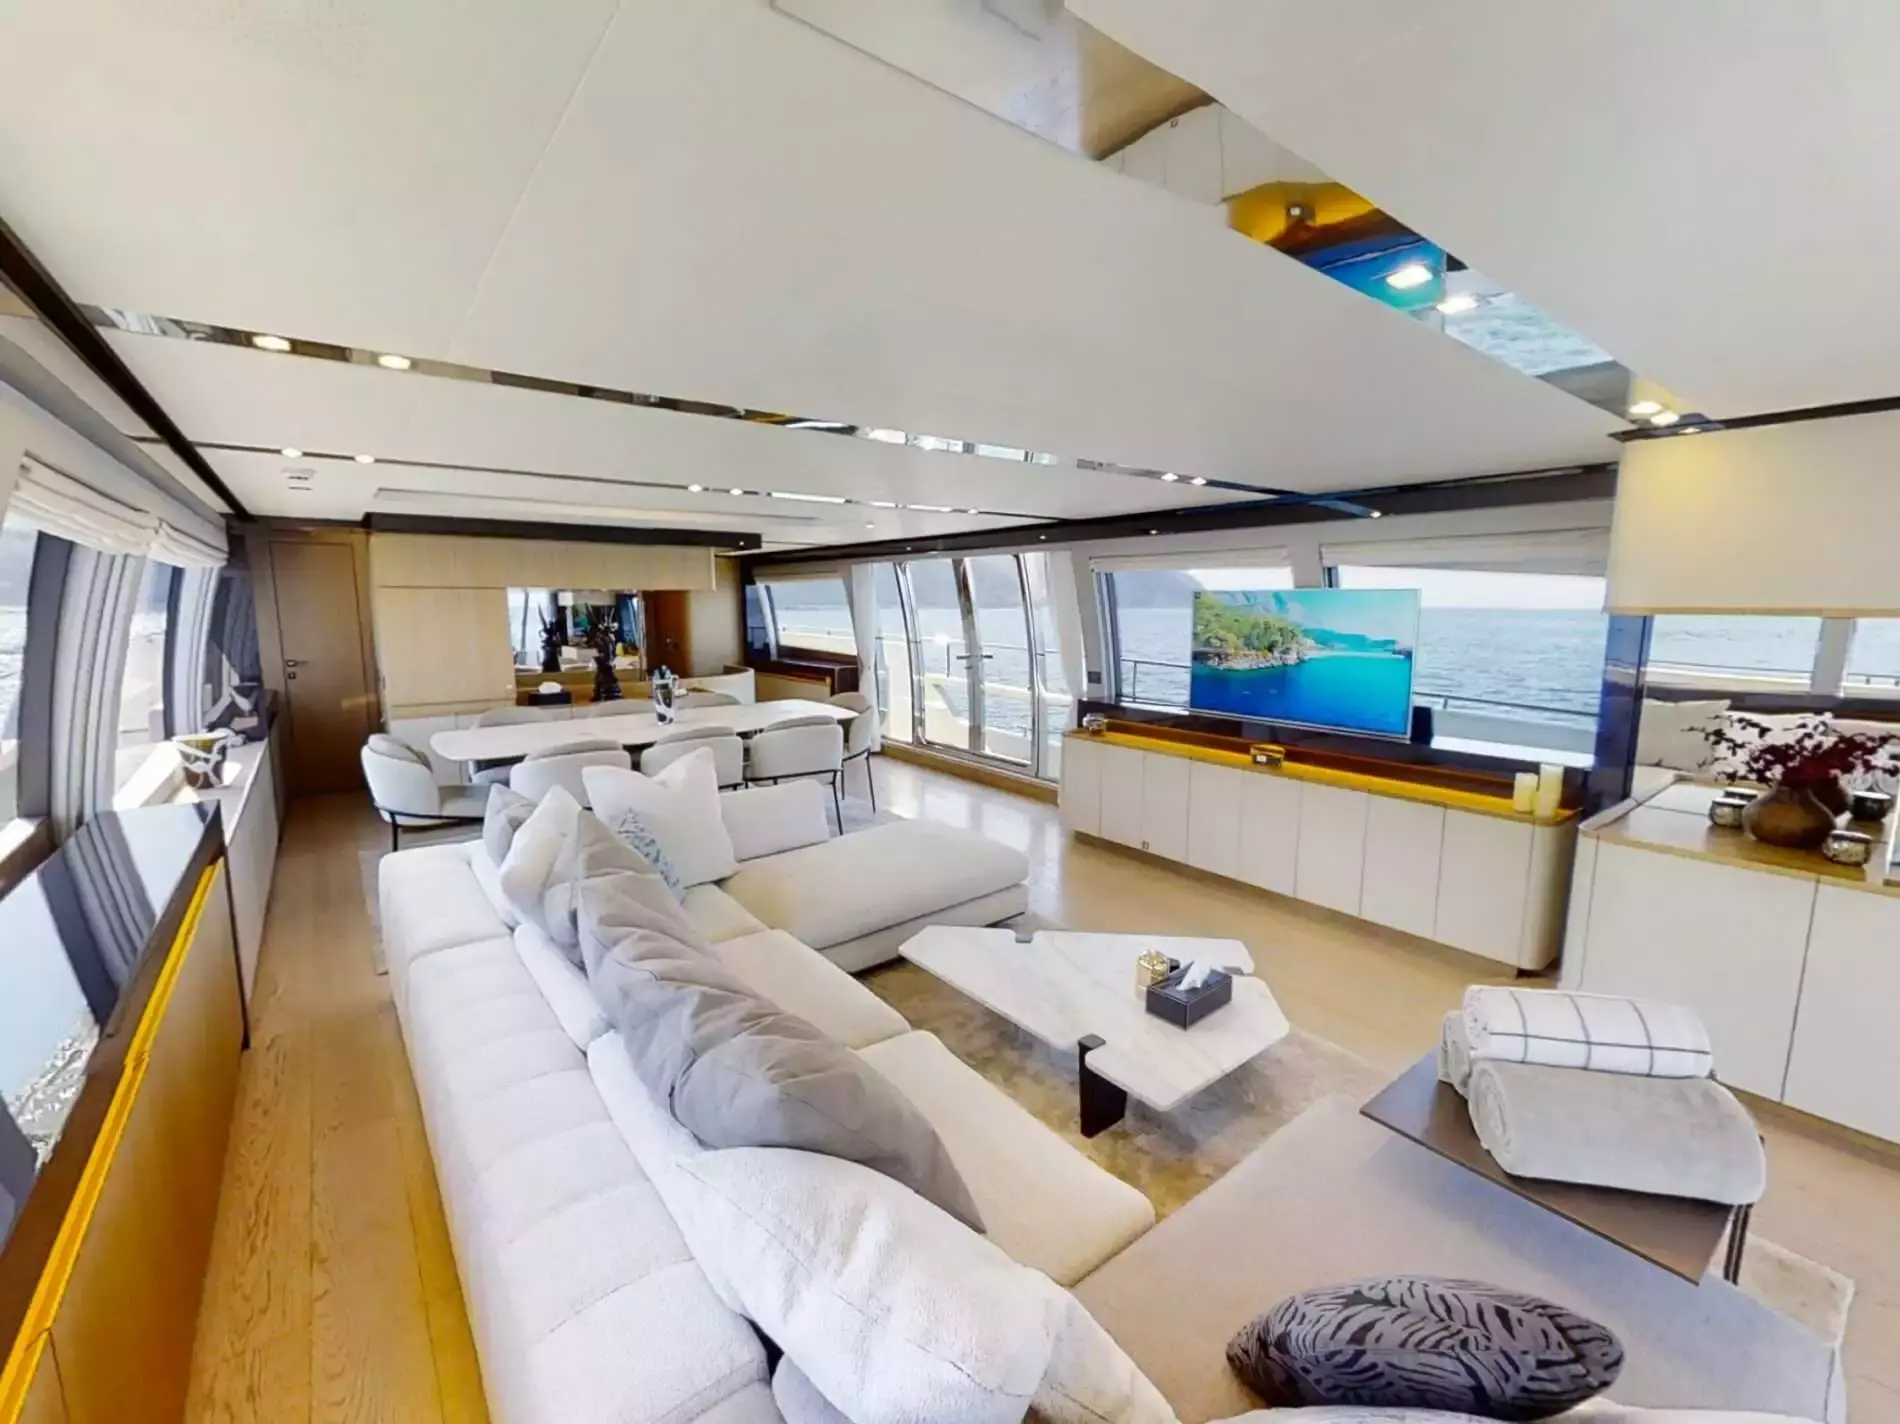 Damari by Ferretti - Top rates for a Charter of a private Superyacht in Italy